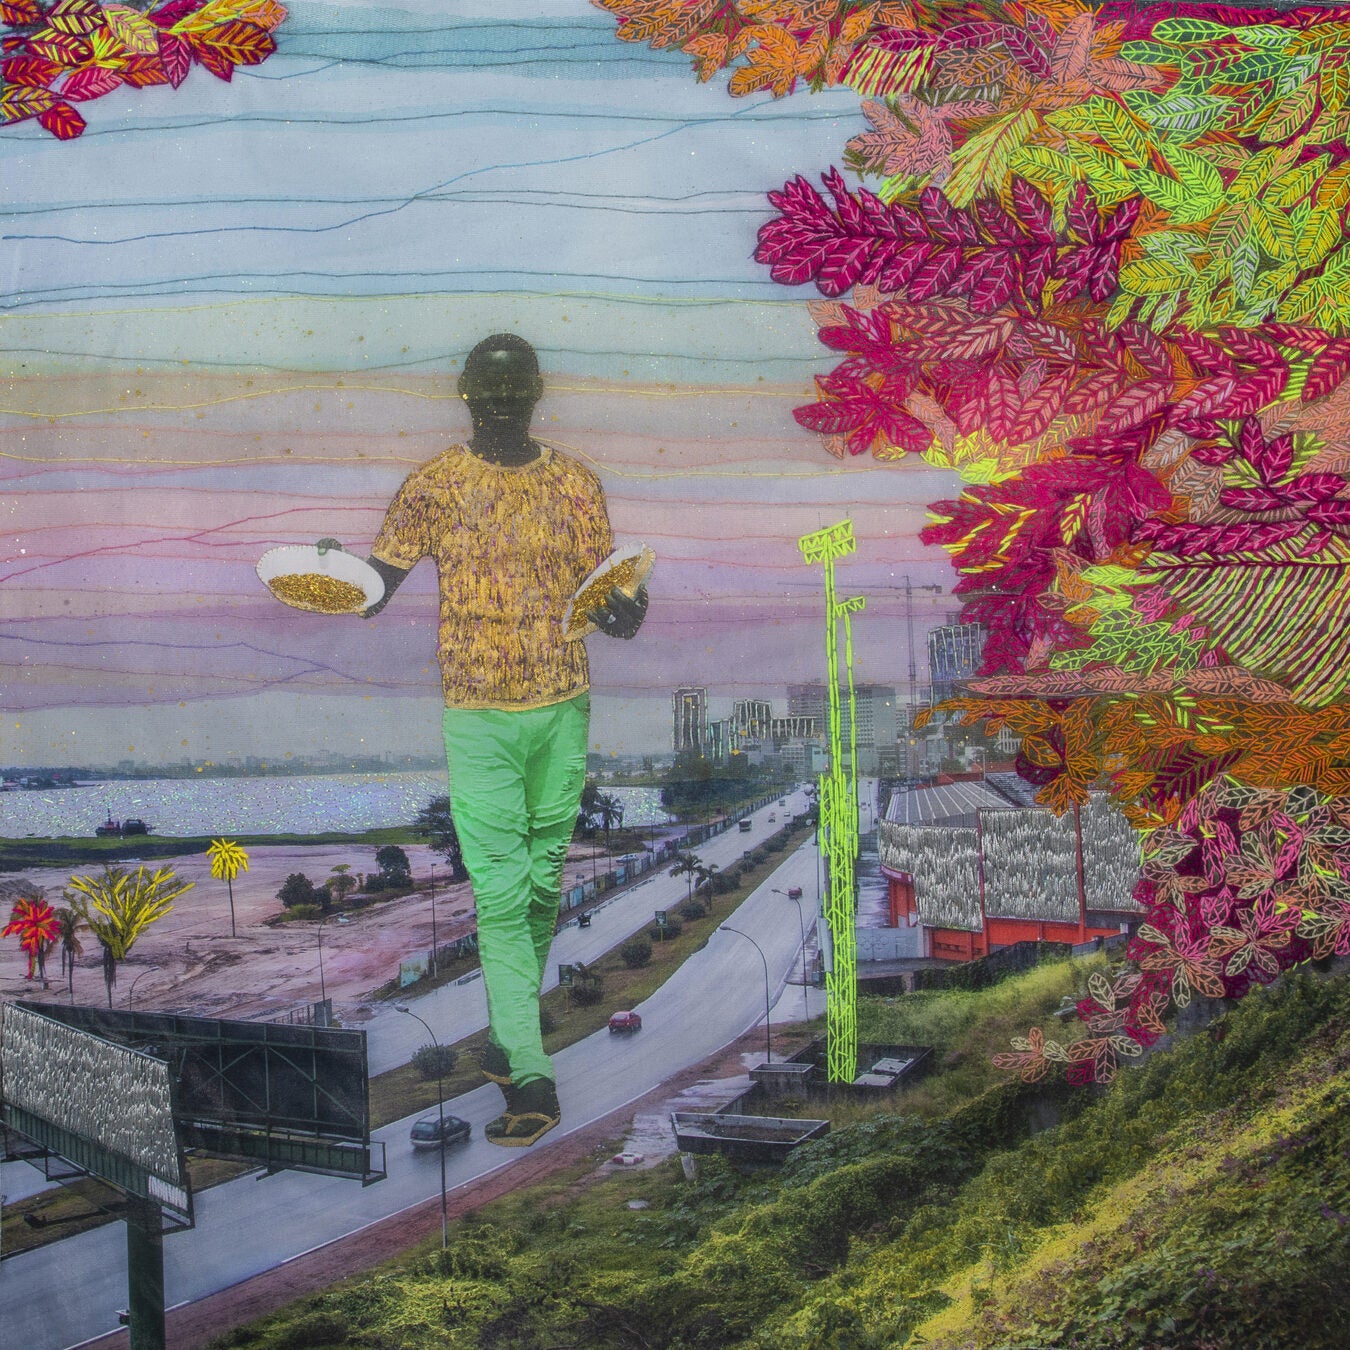 Embroidered photograph of man hovering over city scene surrounded by foliage.